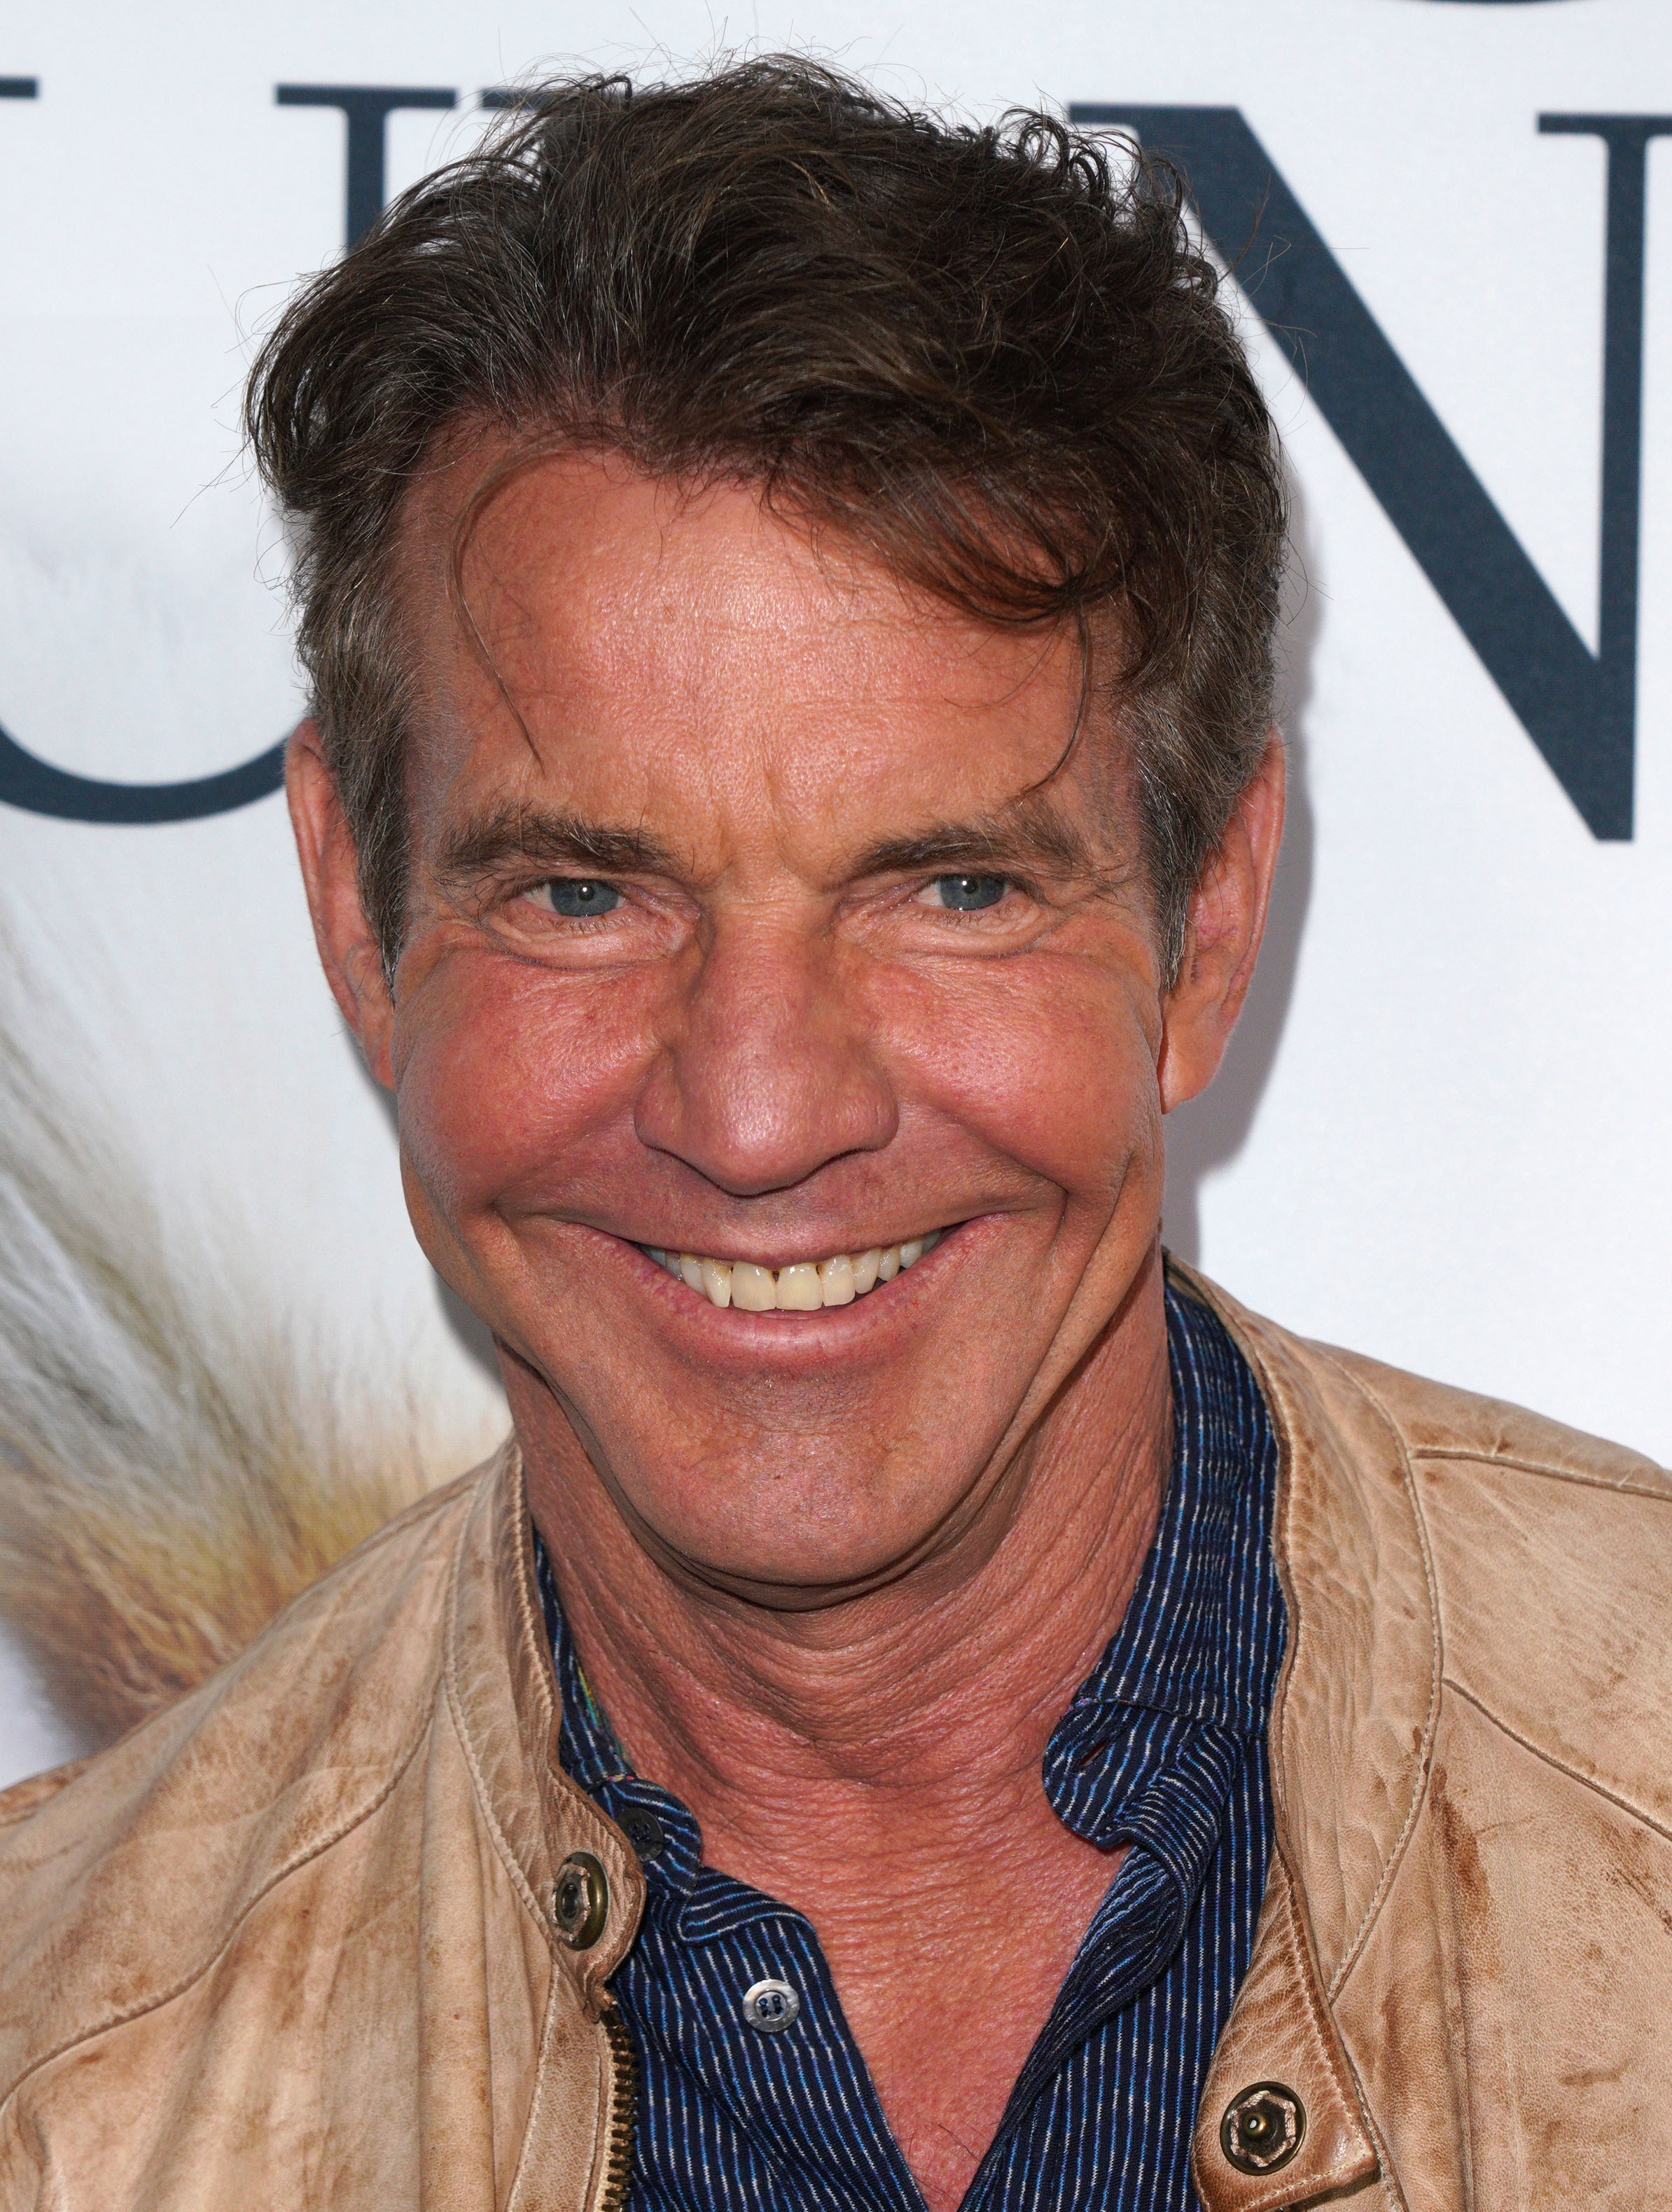 Dennis Quaid attends the premiere of "A Dog's Journey" Hollywood on May 09, 2019 in Hollywood, California | Source: Getty Images